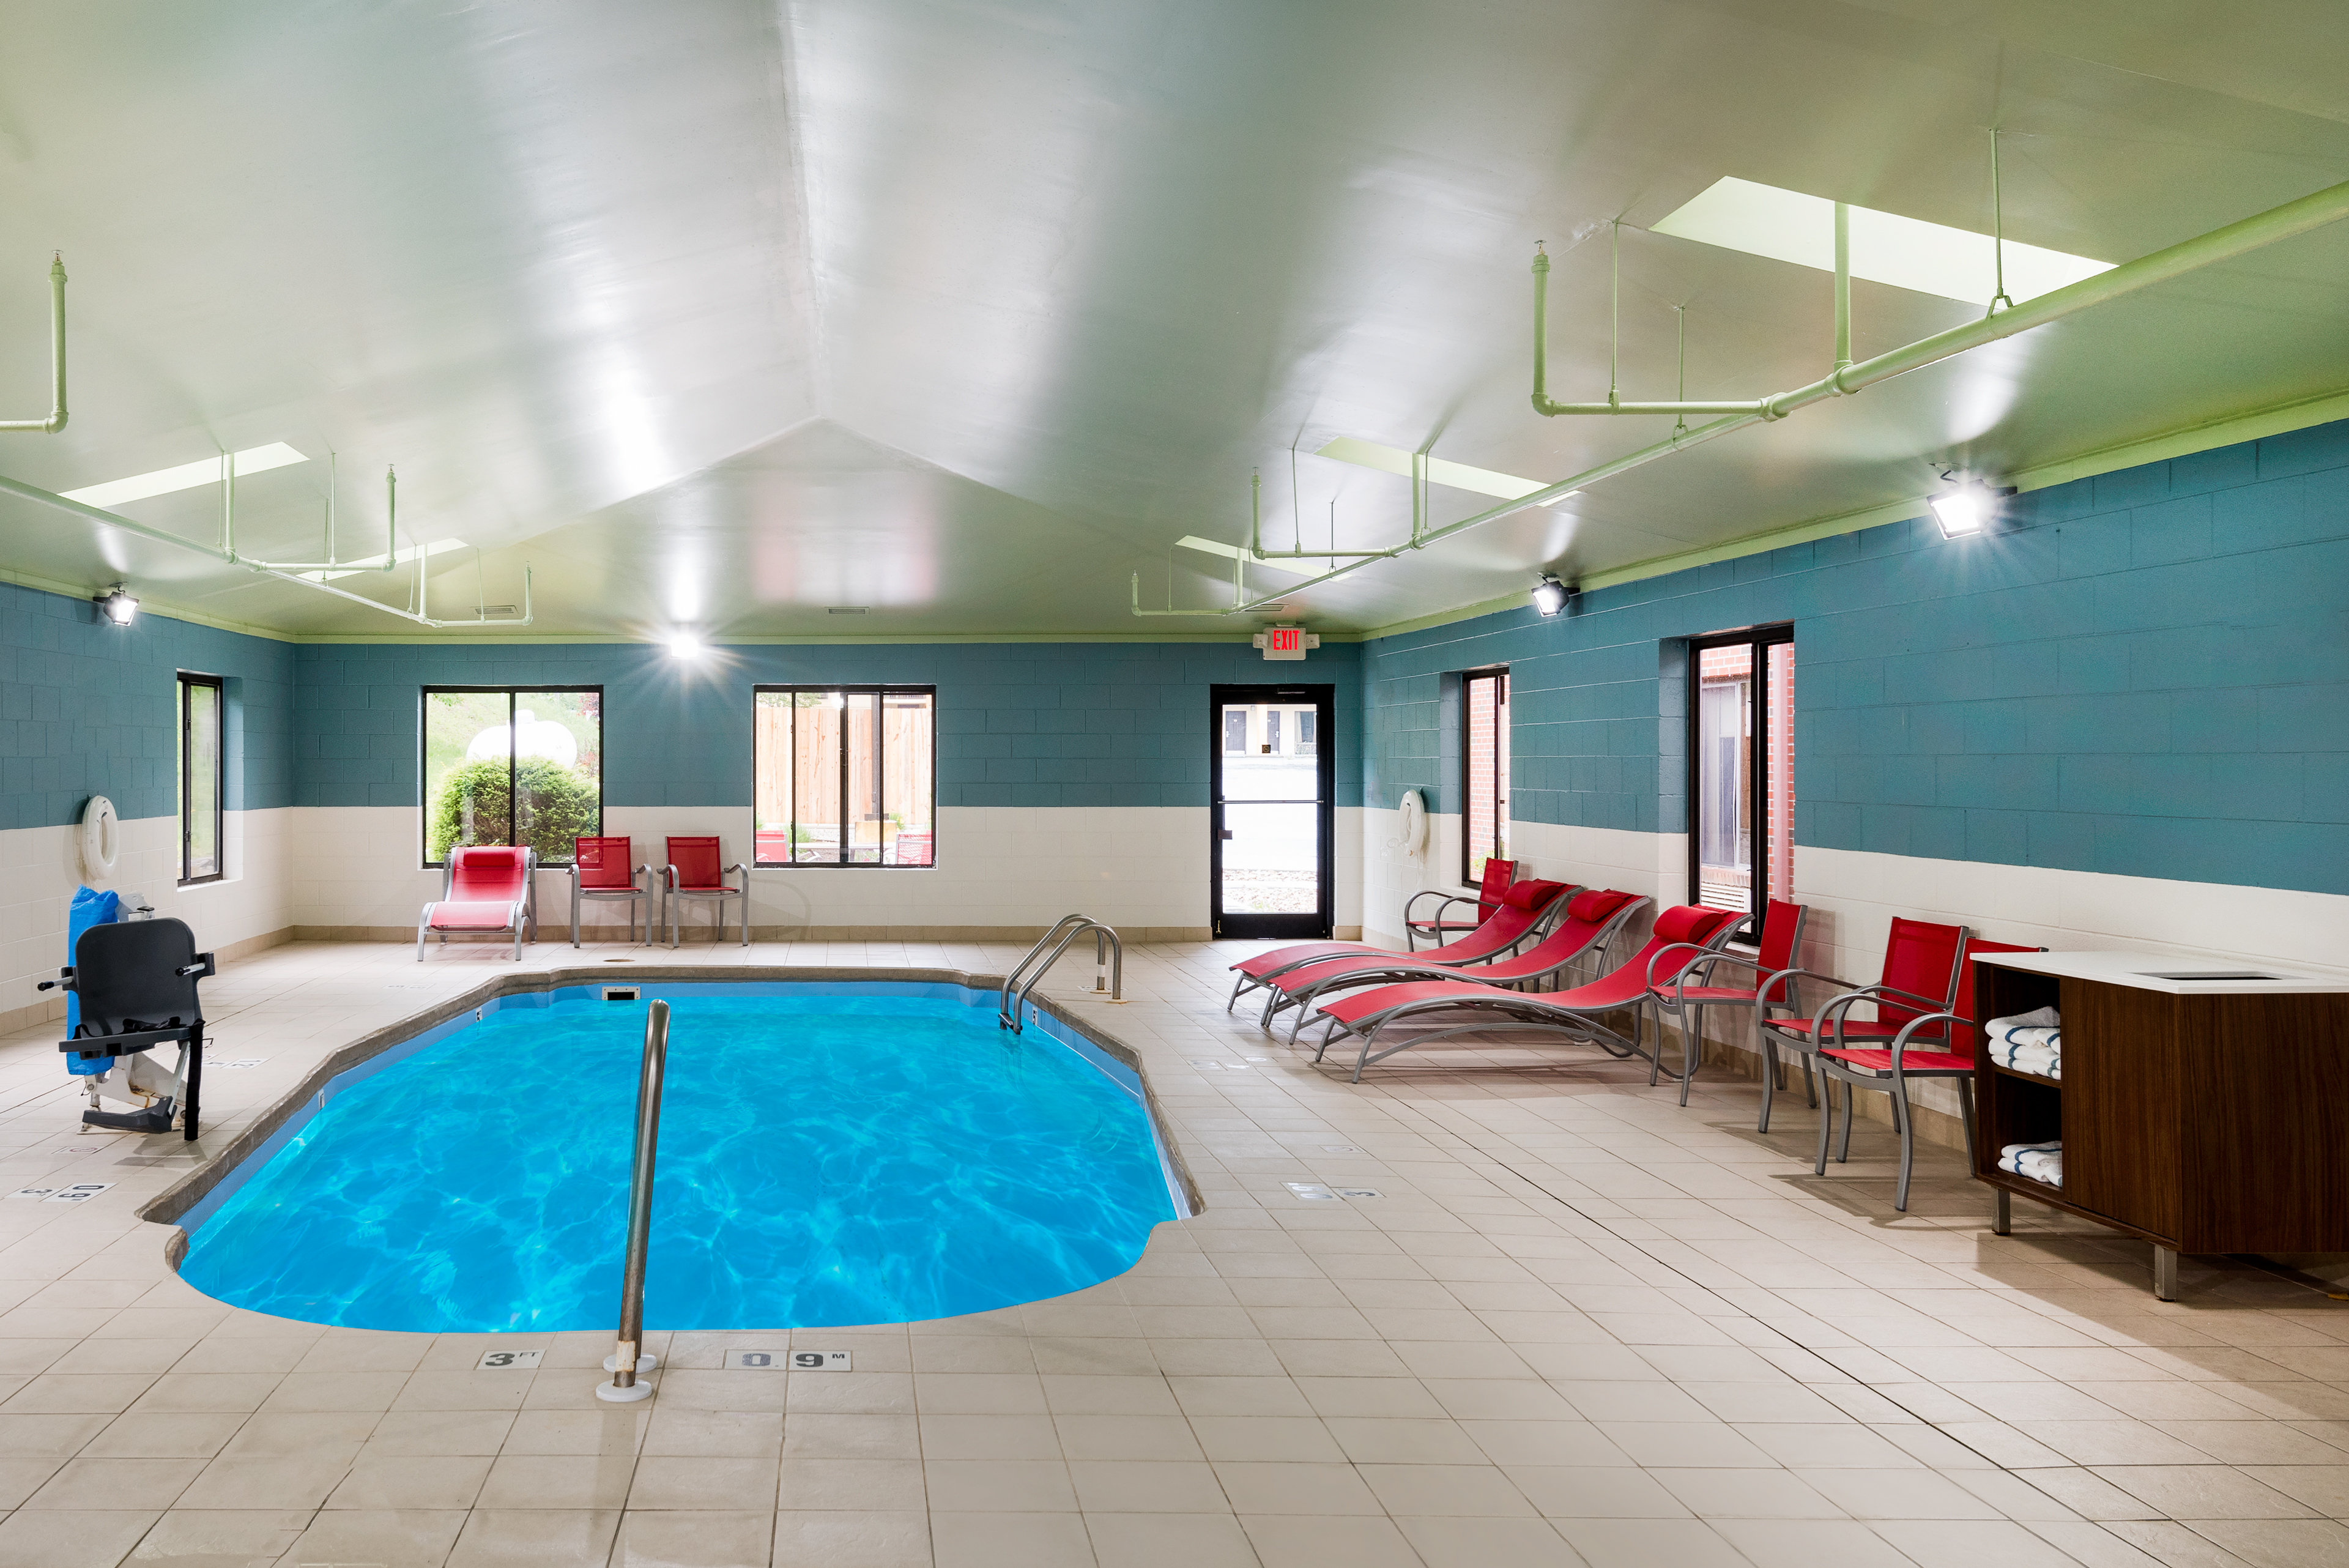 Hang out at our pool at the Holiday Inn Express Hillsville